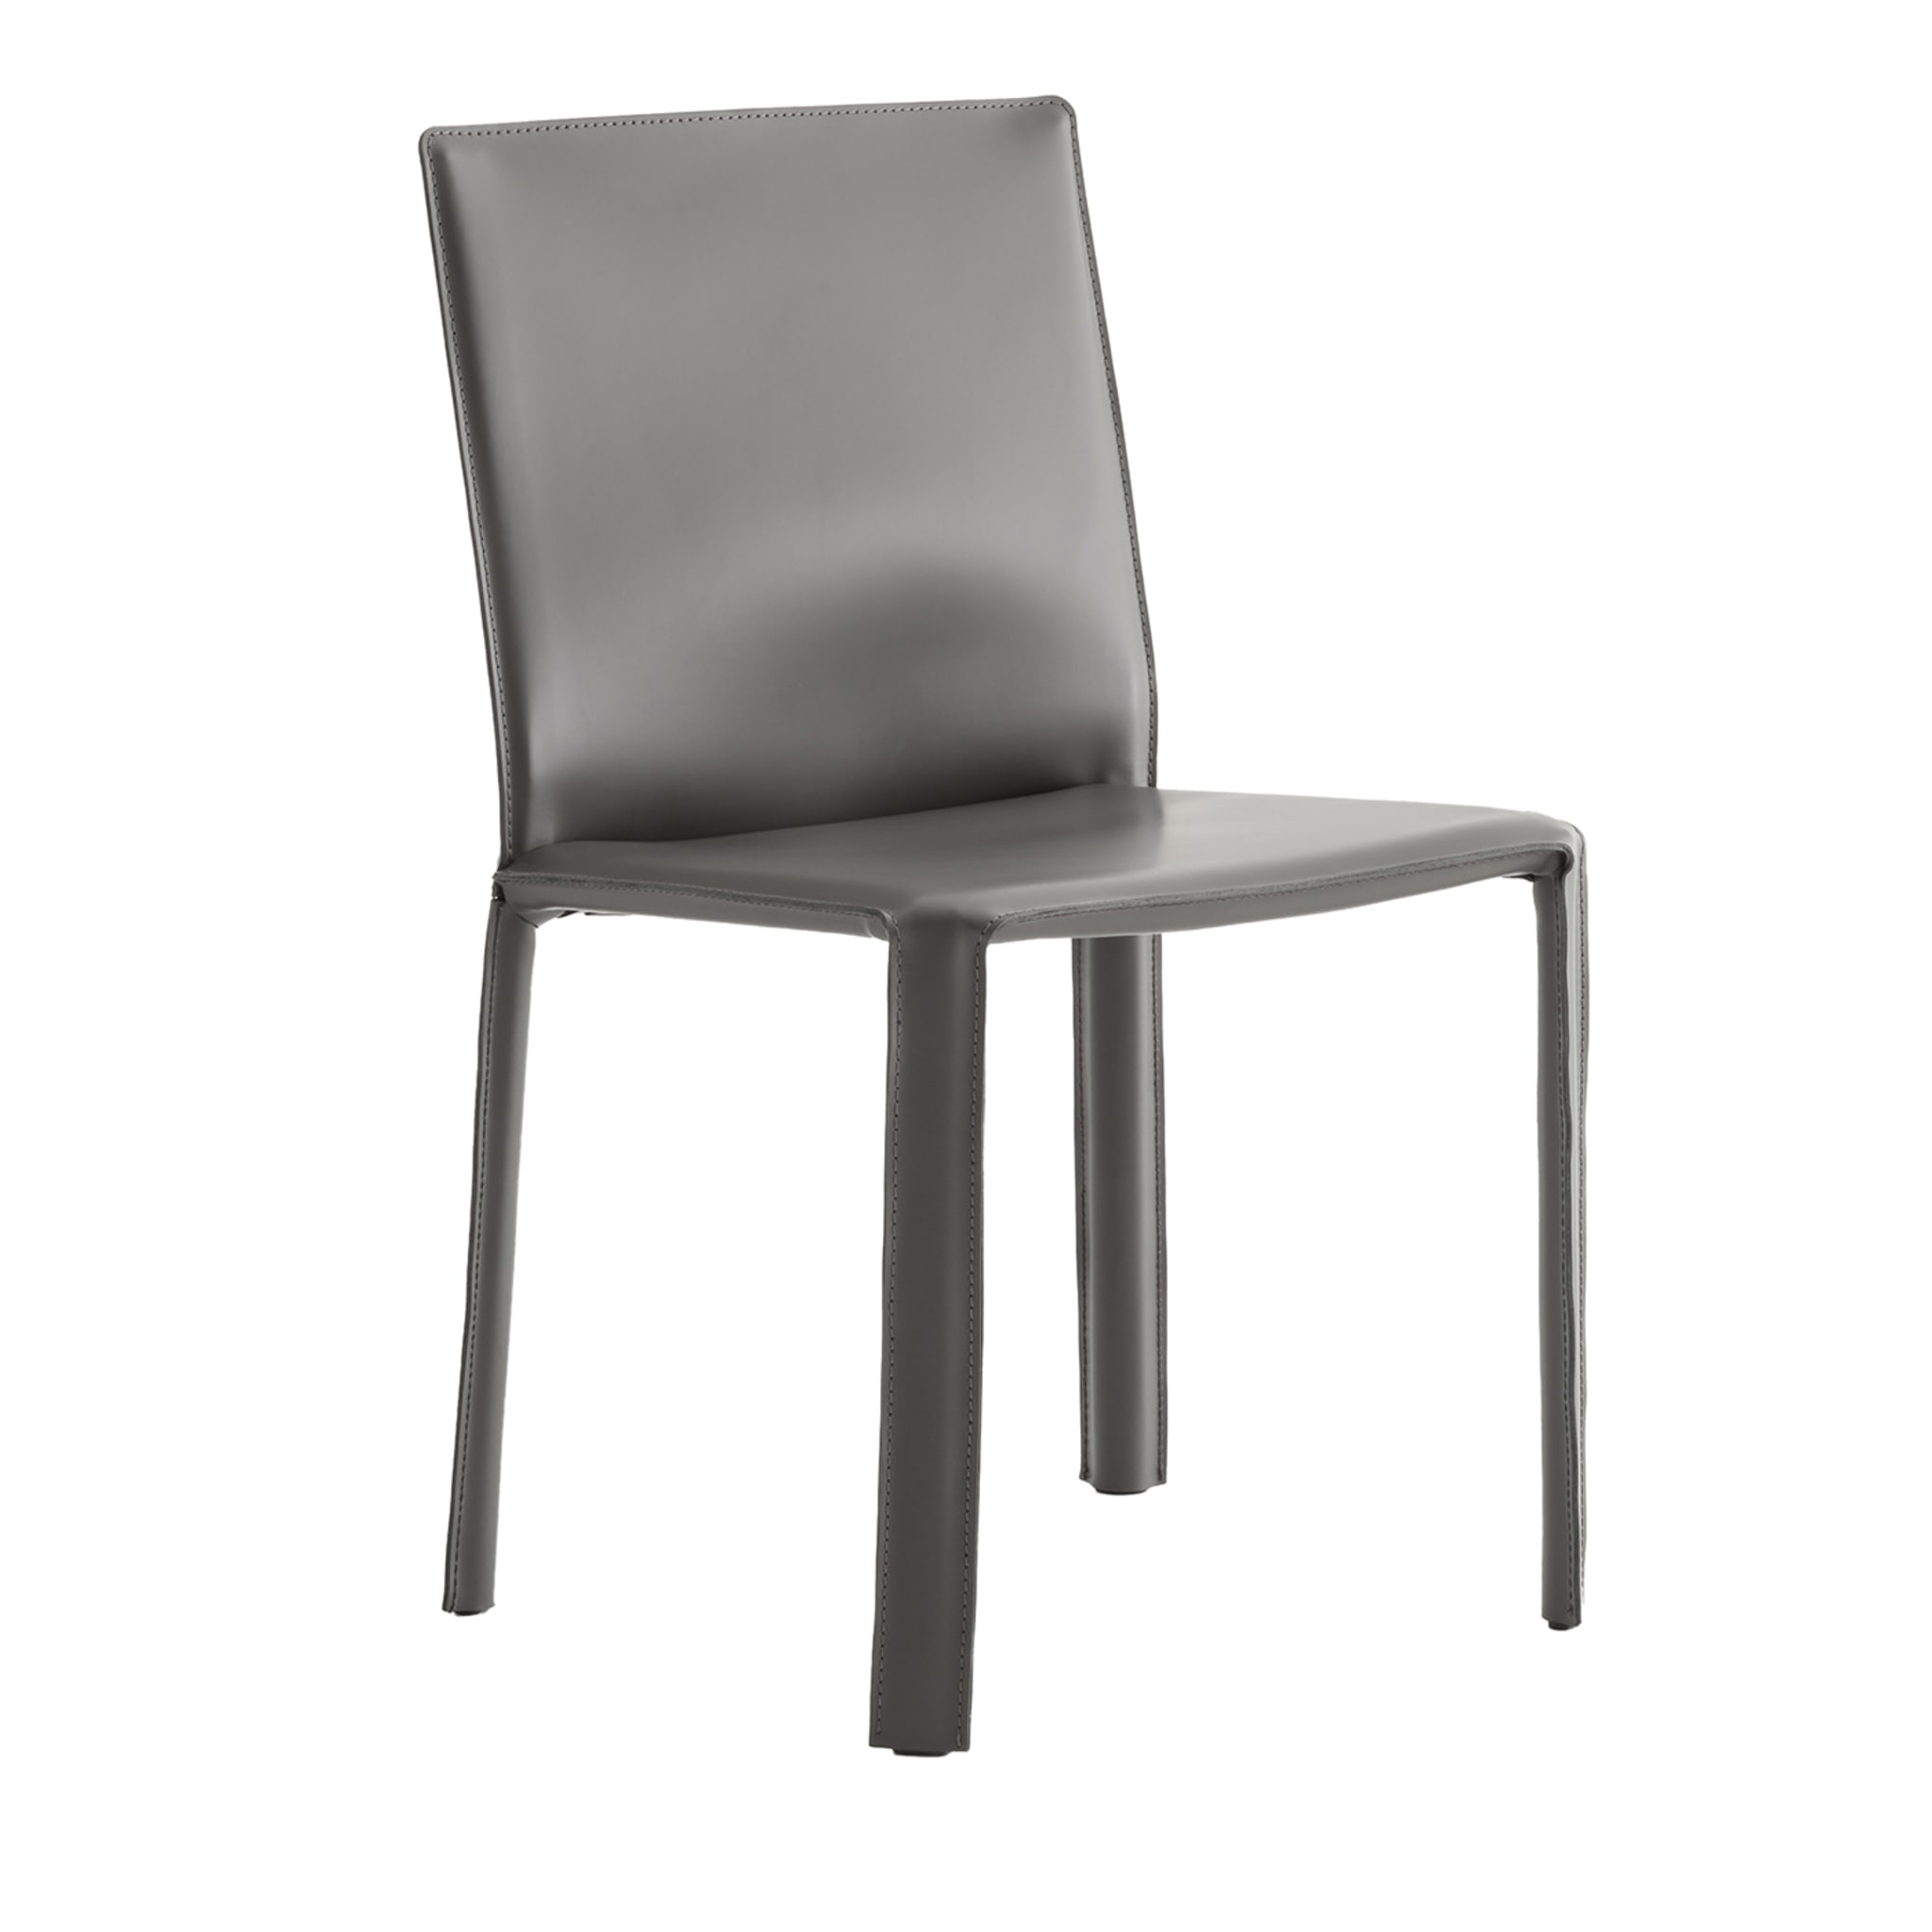 Jumpsuite Gray Leather Chair - Main view